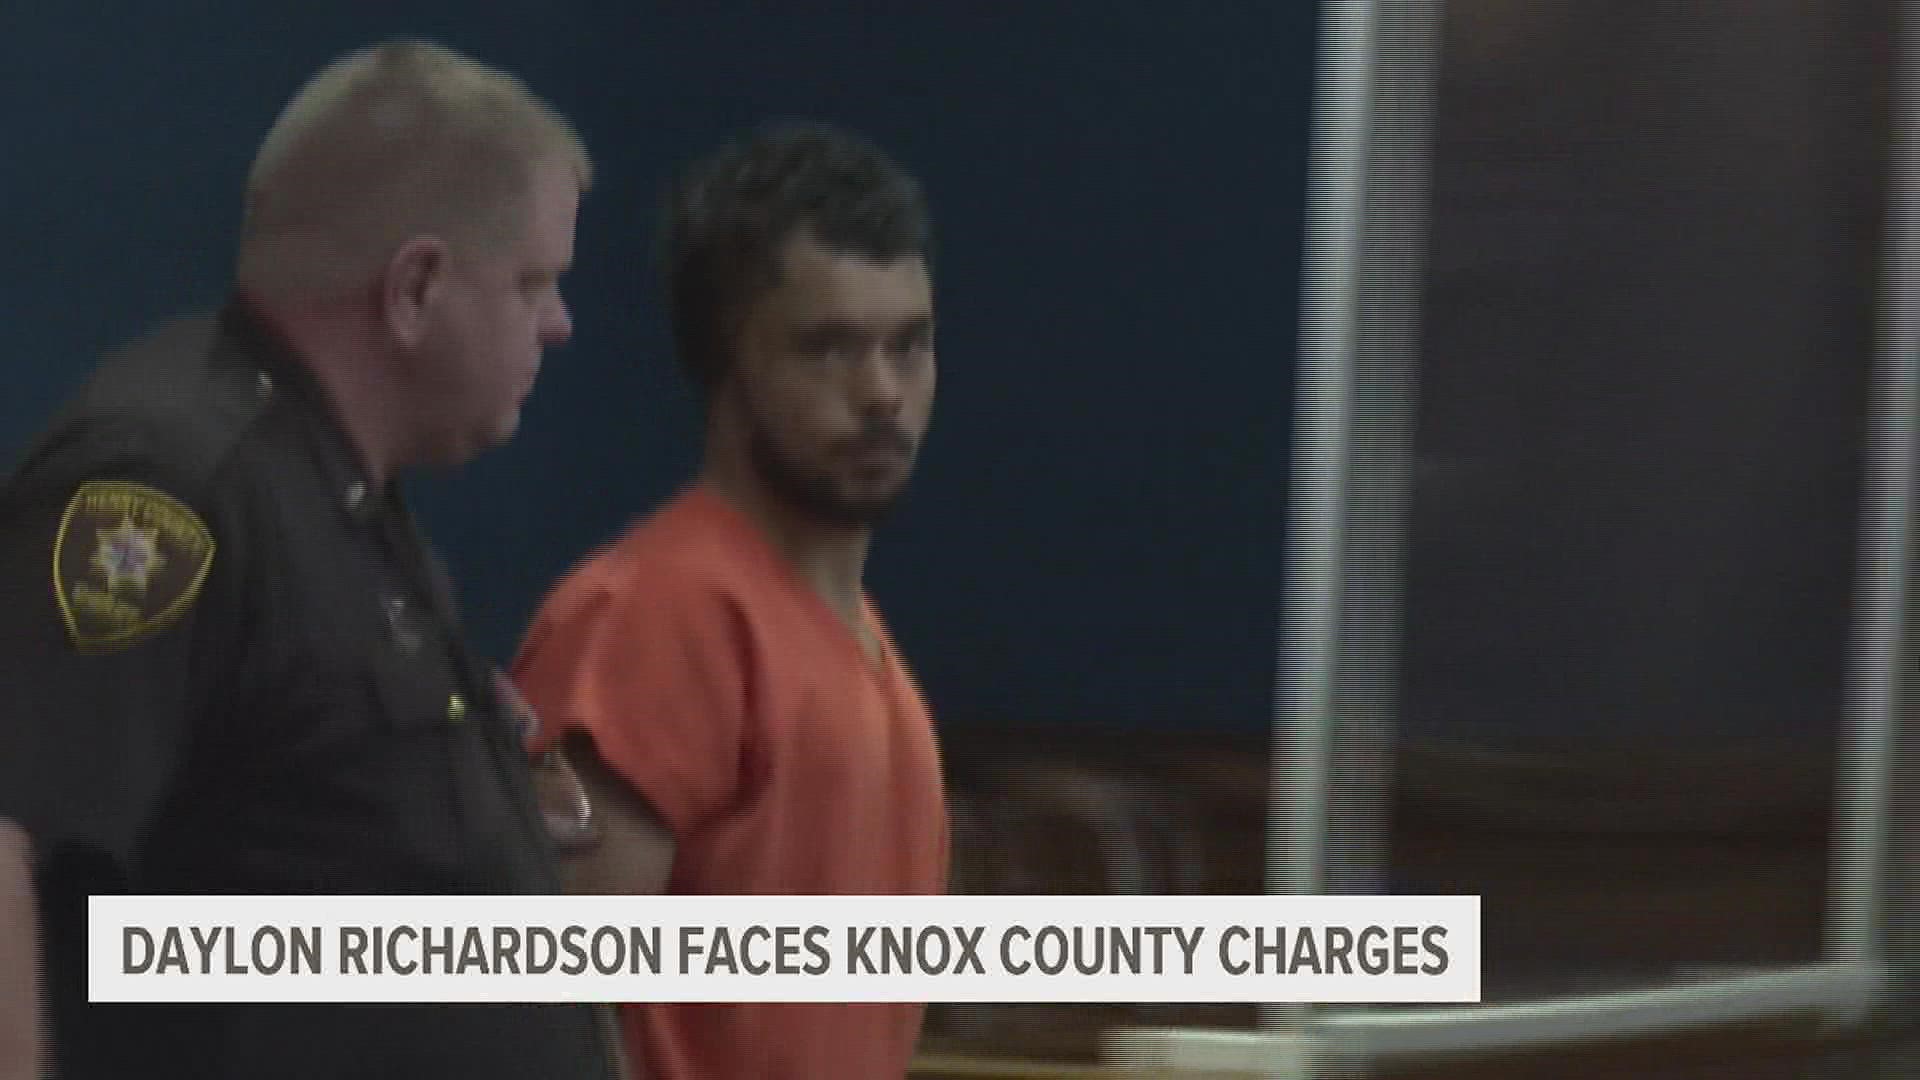 Daylon Richardson now faces additional charges in Knox County for allegedly shooting at another officer during the chase that killed Deputy Nicholas Weist.